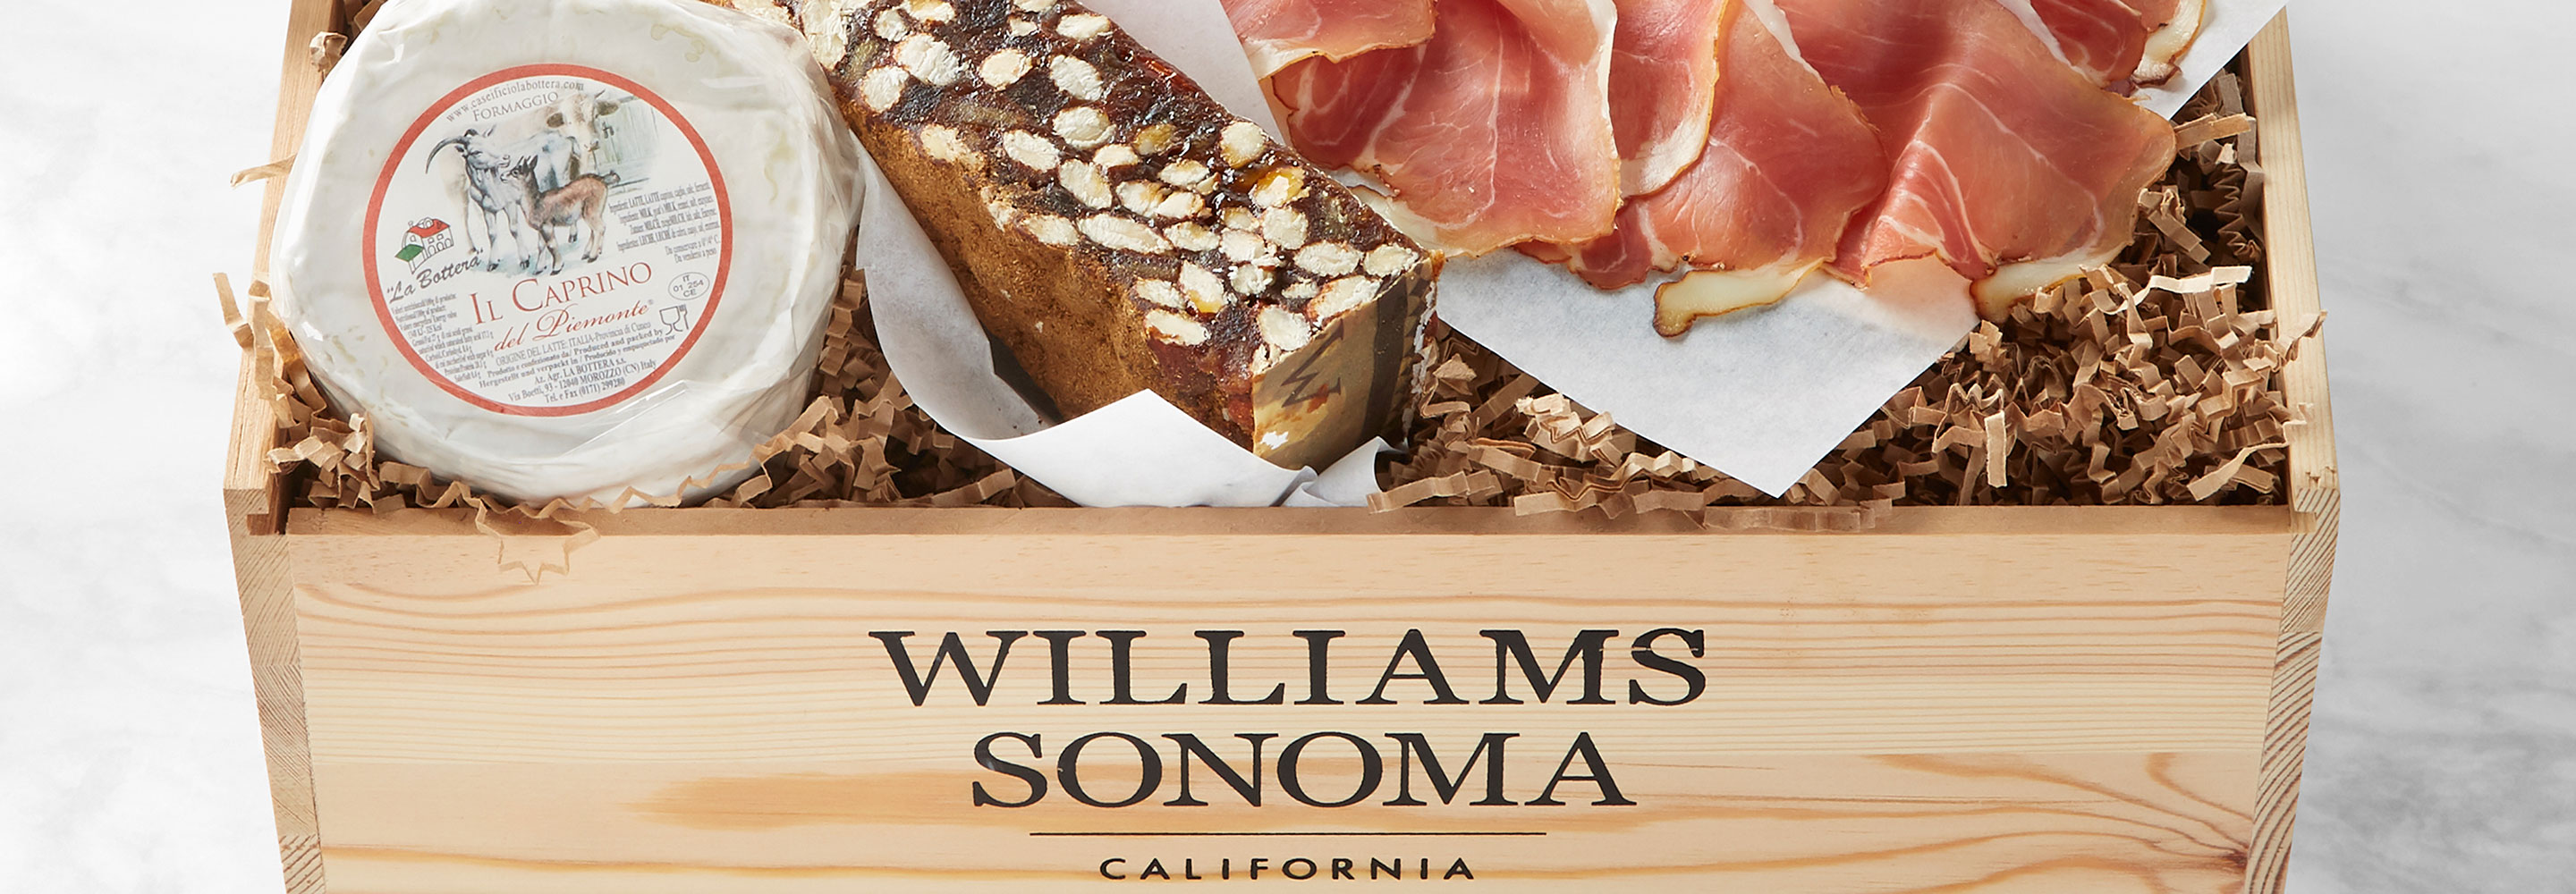 Williams Sonoma Food Gifts Image